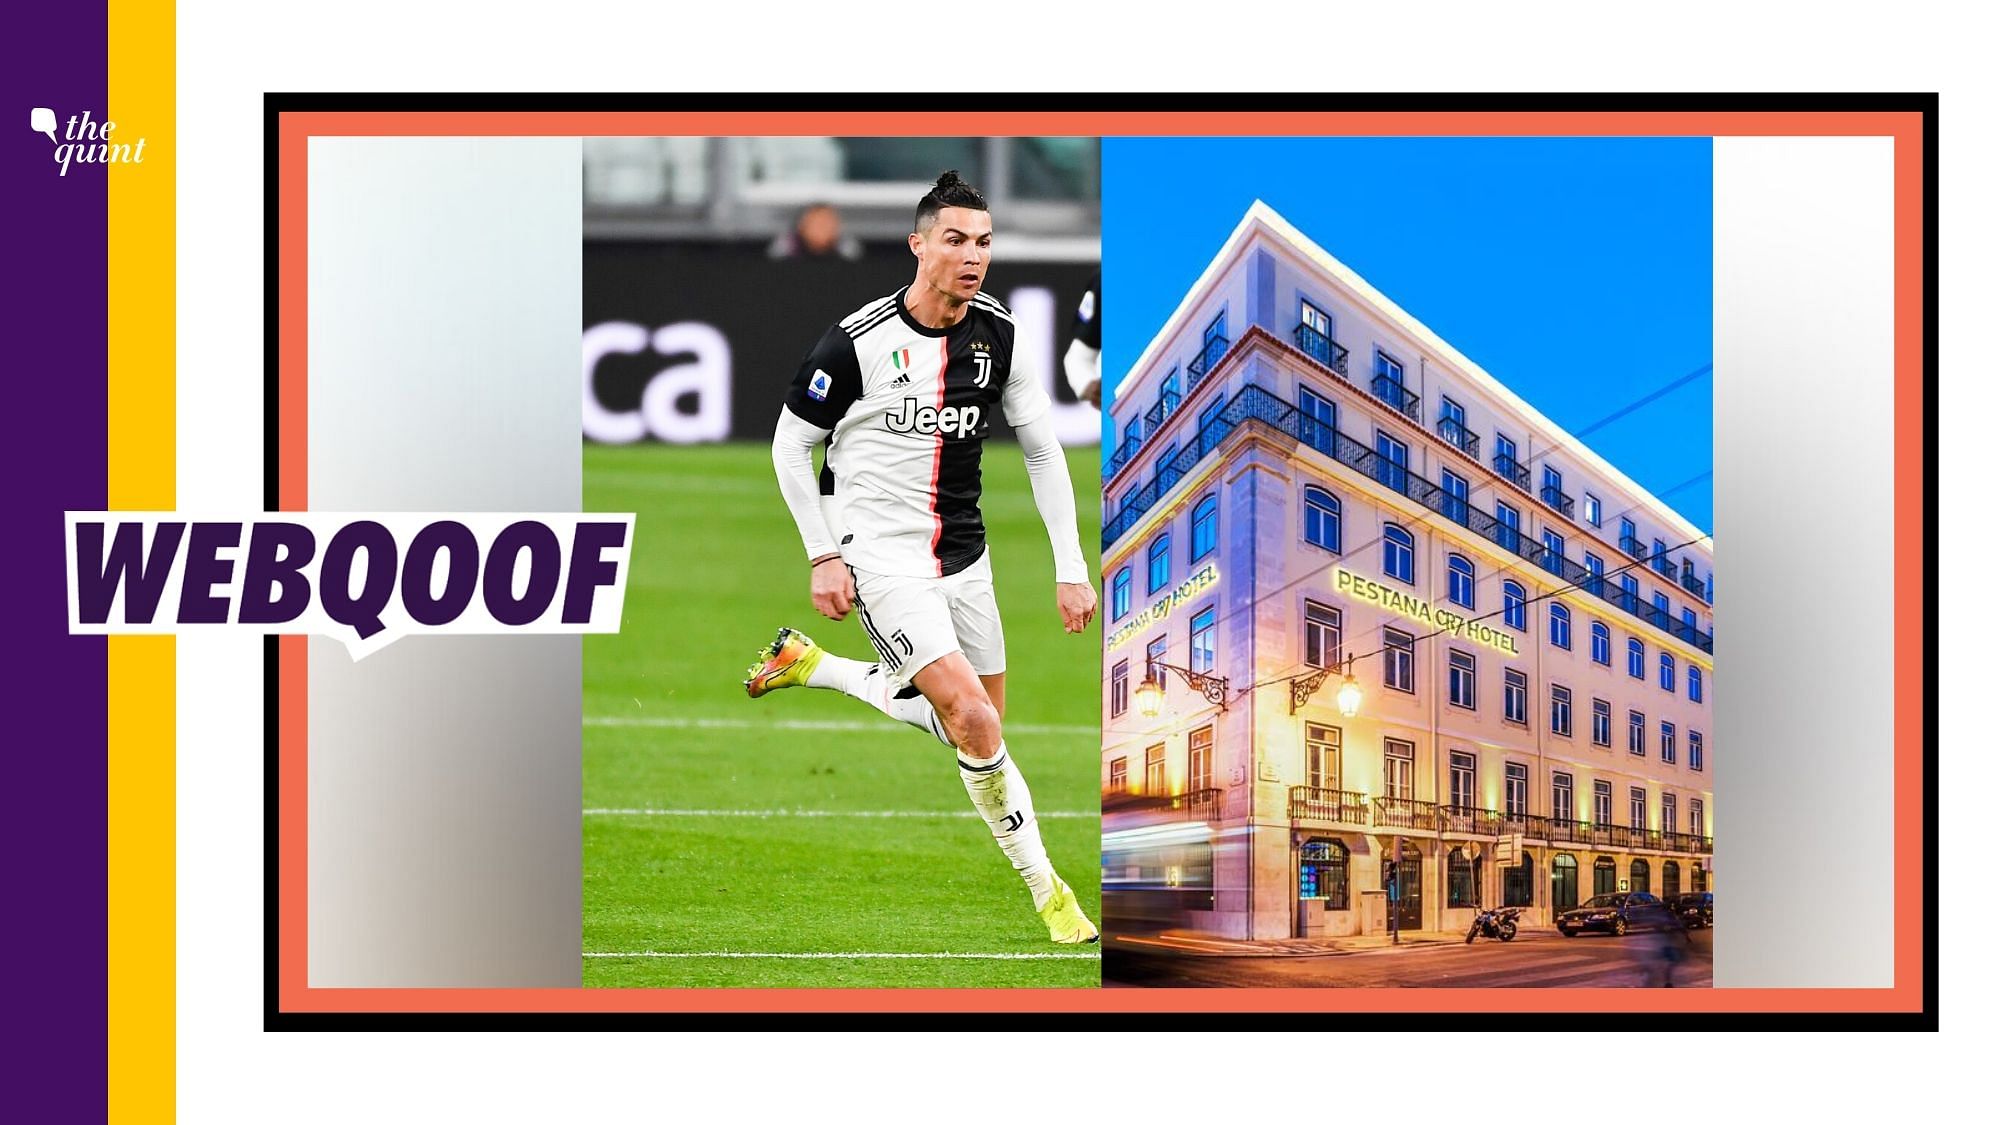 Several media reports falsely claimed that Cristiano Ronaldo is transforming his hotels into hospitals amid coronavirus outbreak.